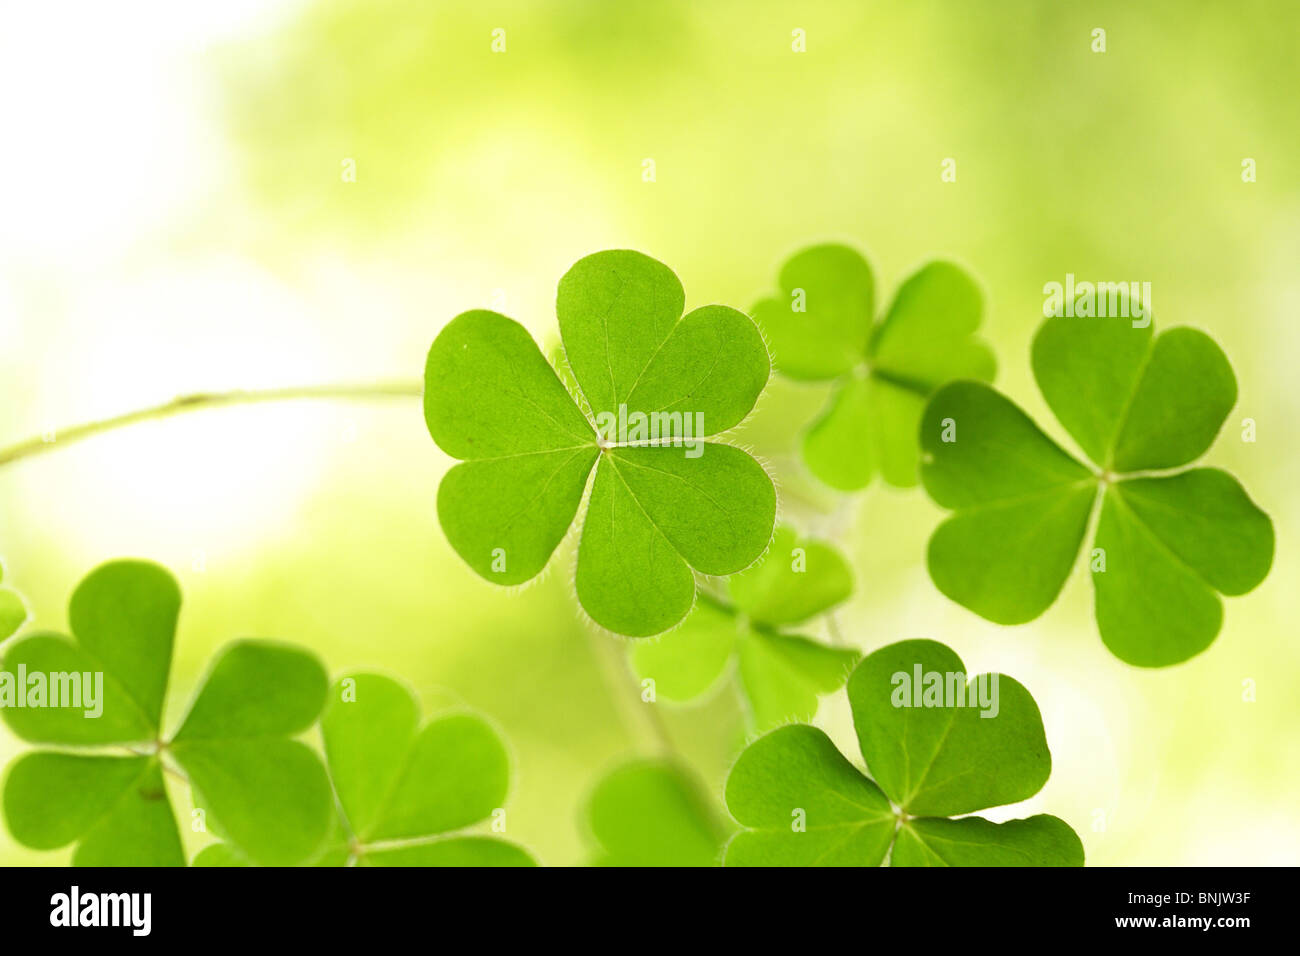 Three leaf clovers for backgrounds Stock Photo